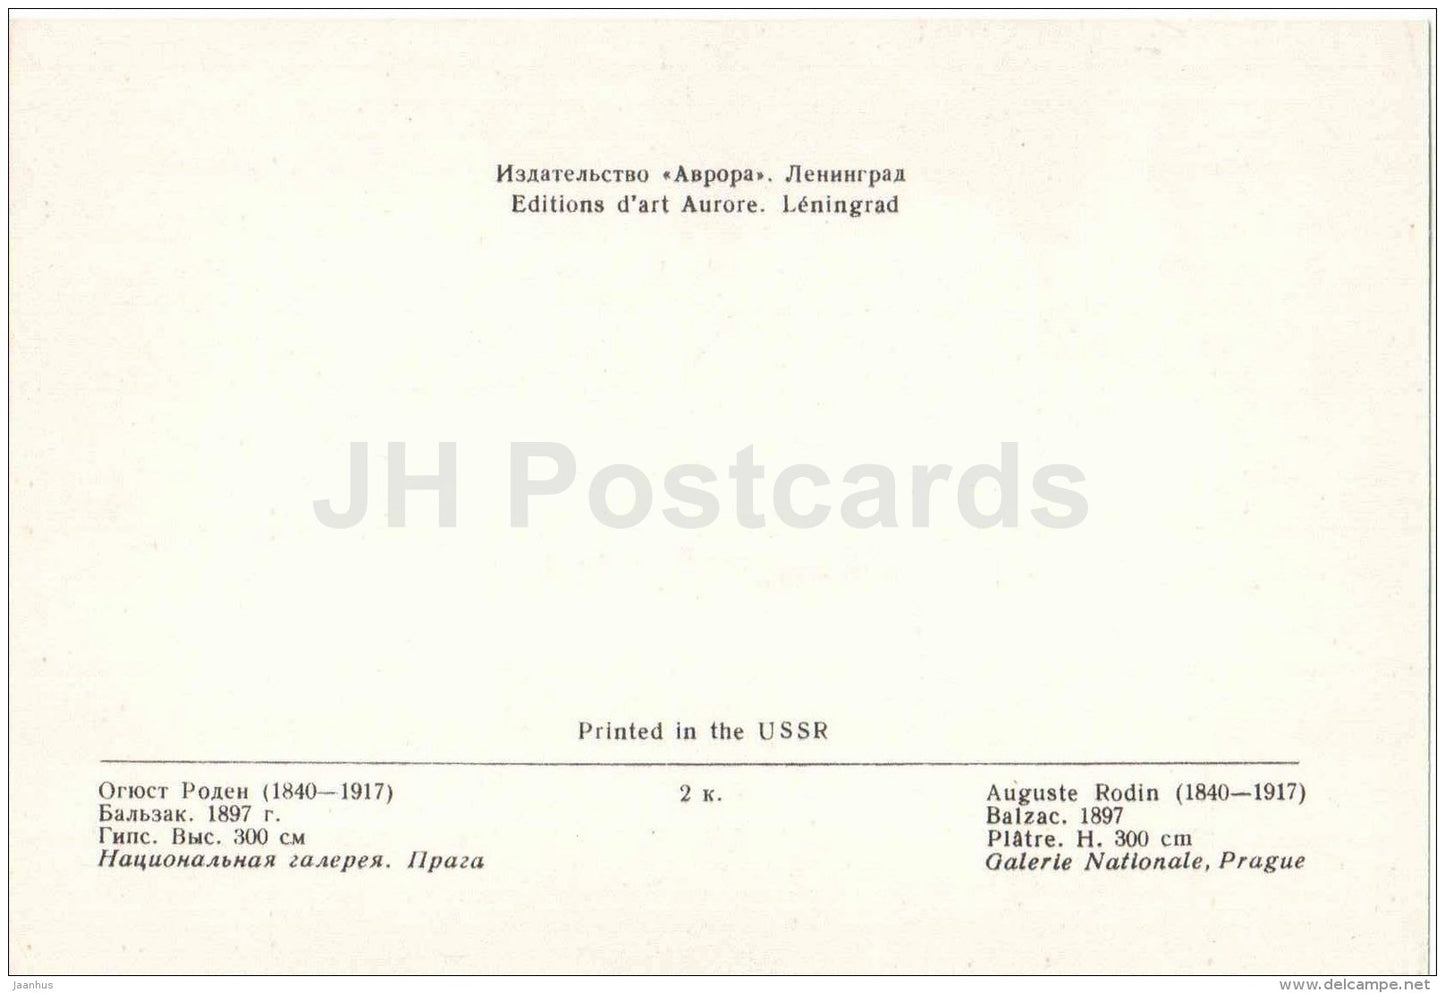 sculpture by Auguste Rodin - french writer Honore de Balzac ,1897 - french art - unused - JH Postcards